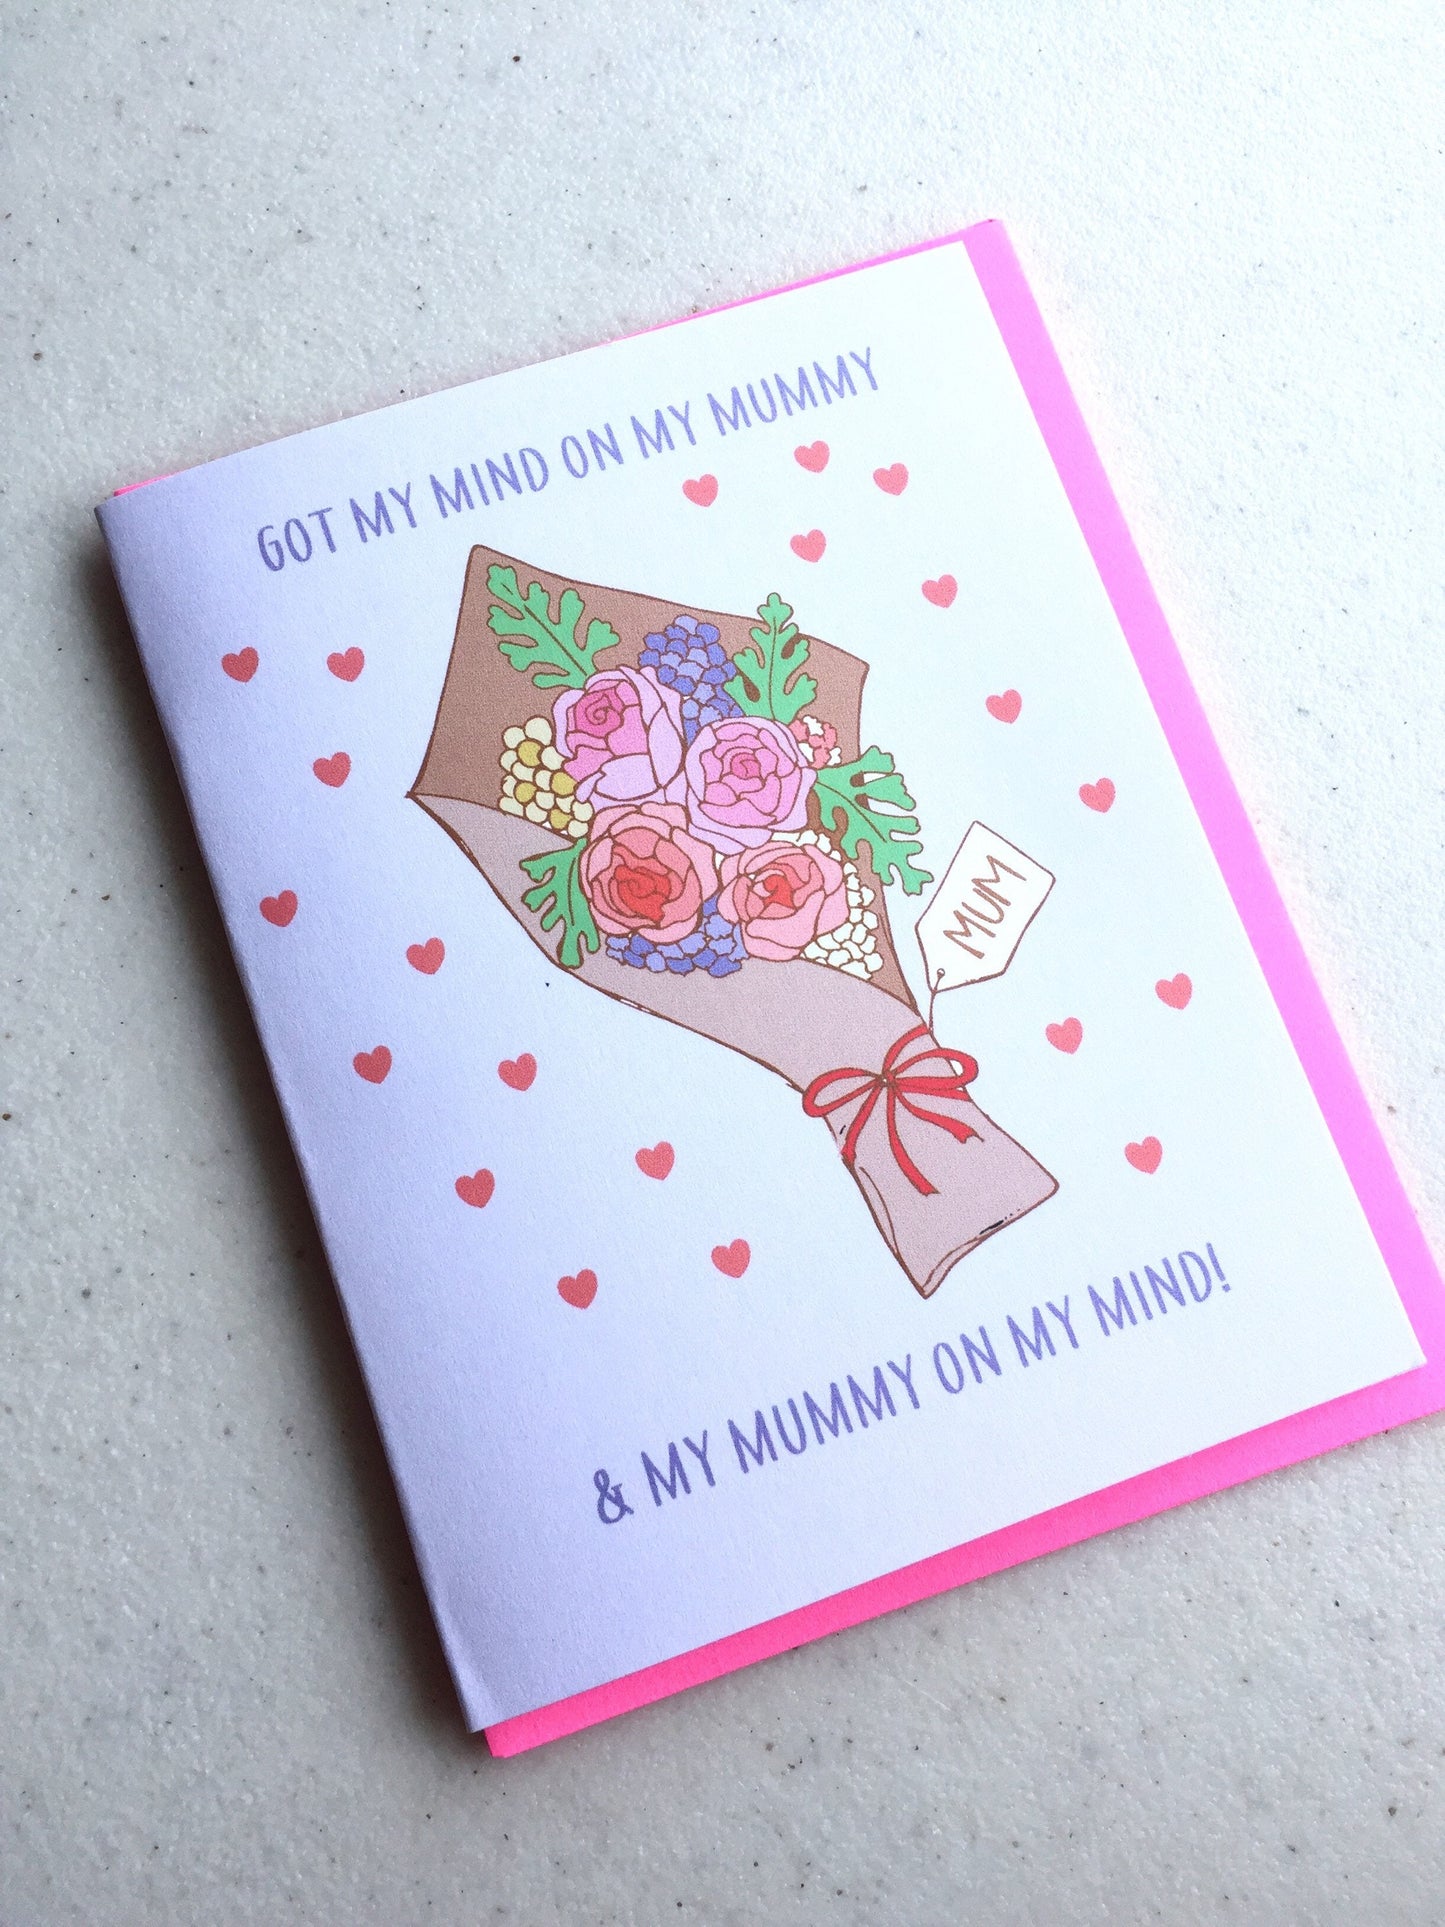 Mind on My Mummy Mother's Day Card - Flower Bouquet Mothers Day Card, Hip Hop Card for Mom, Mom Birthday Card